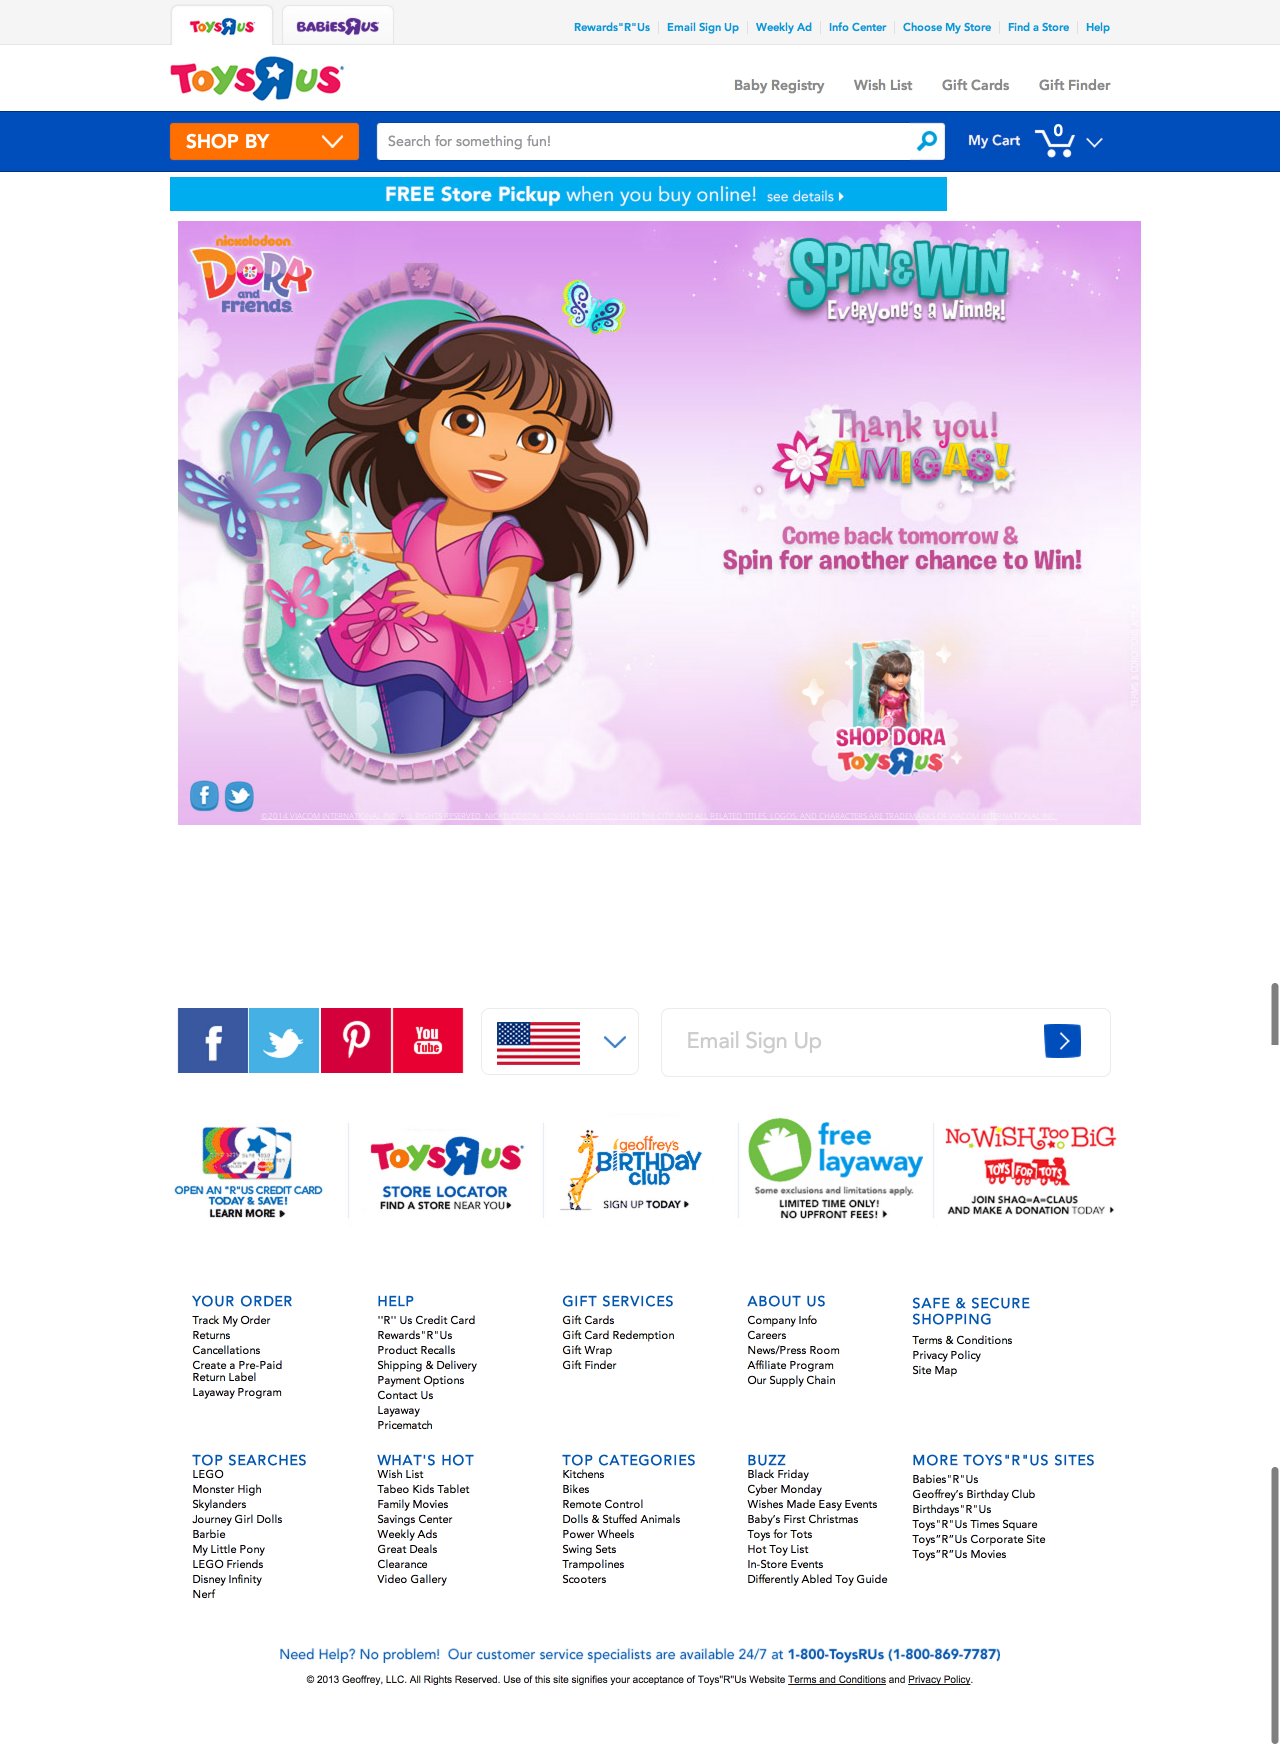 Hosted on the Toys R Us website